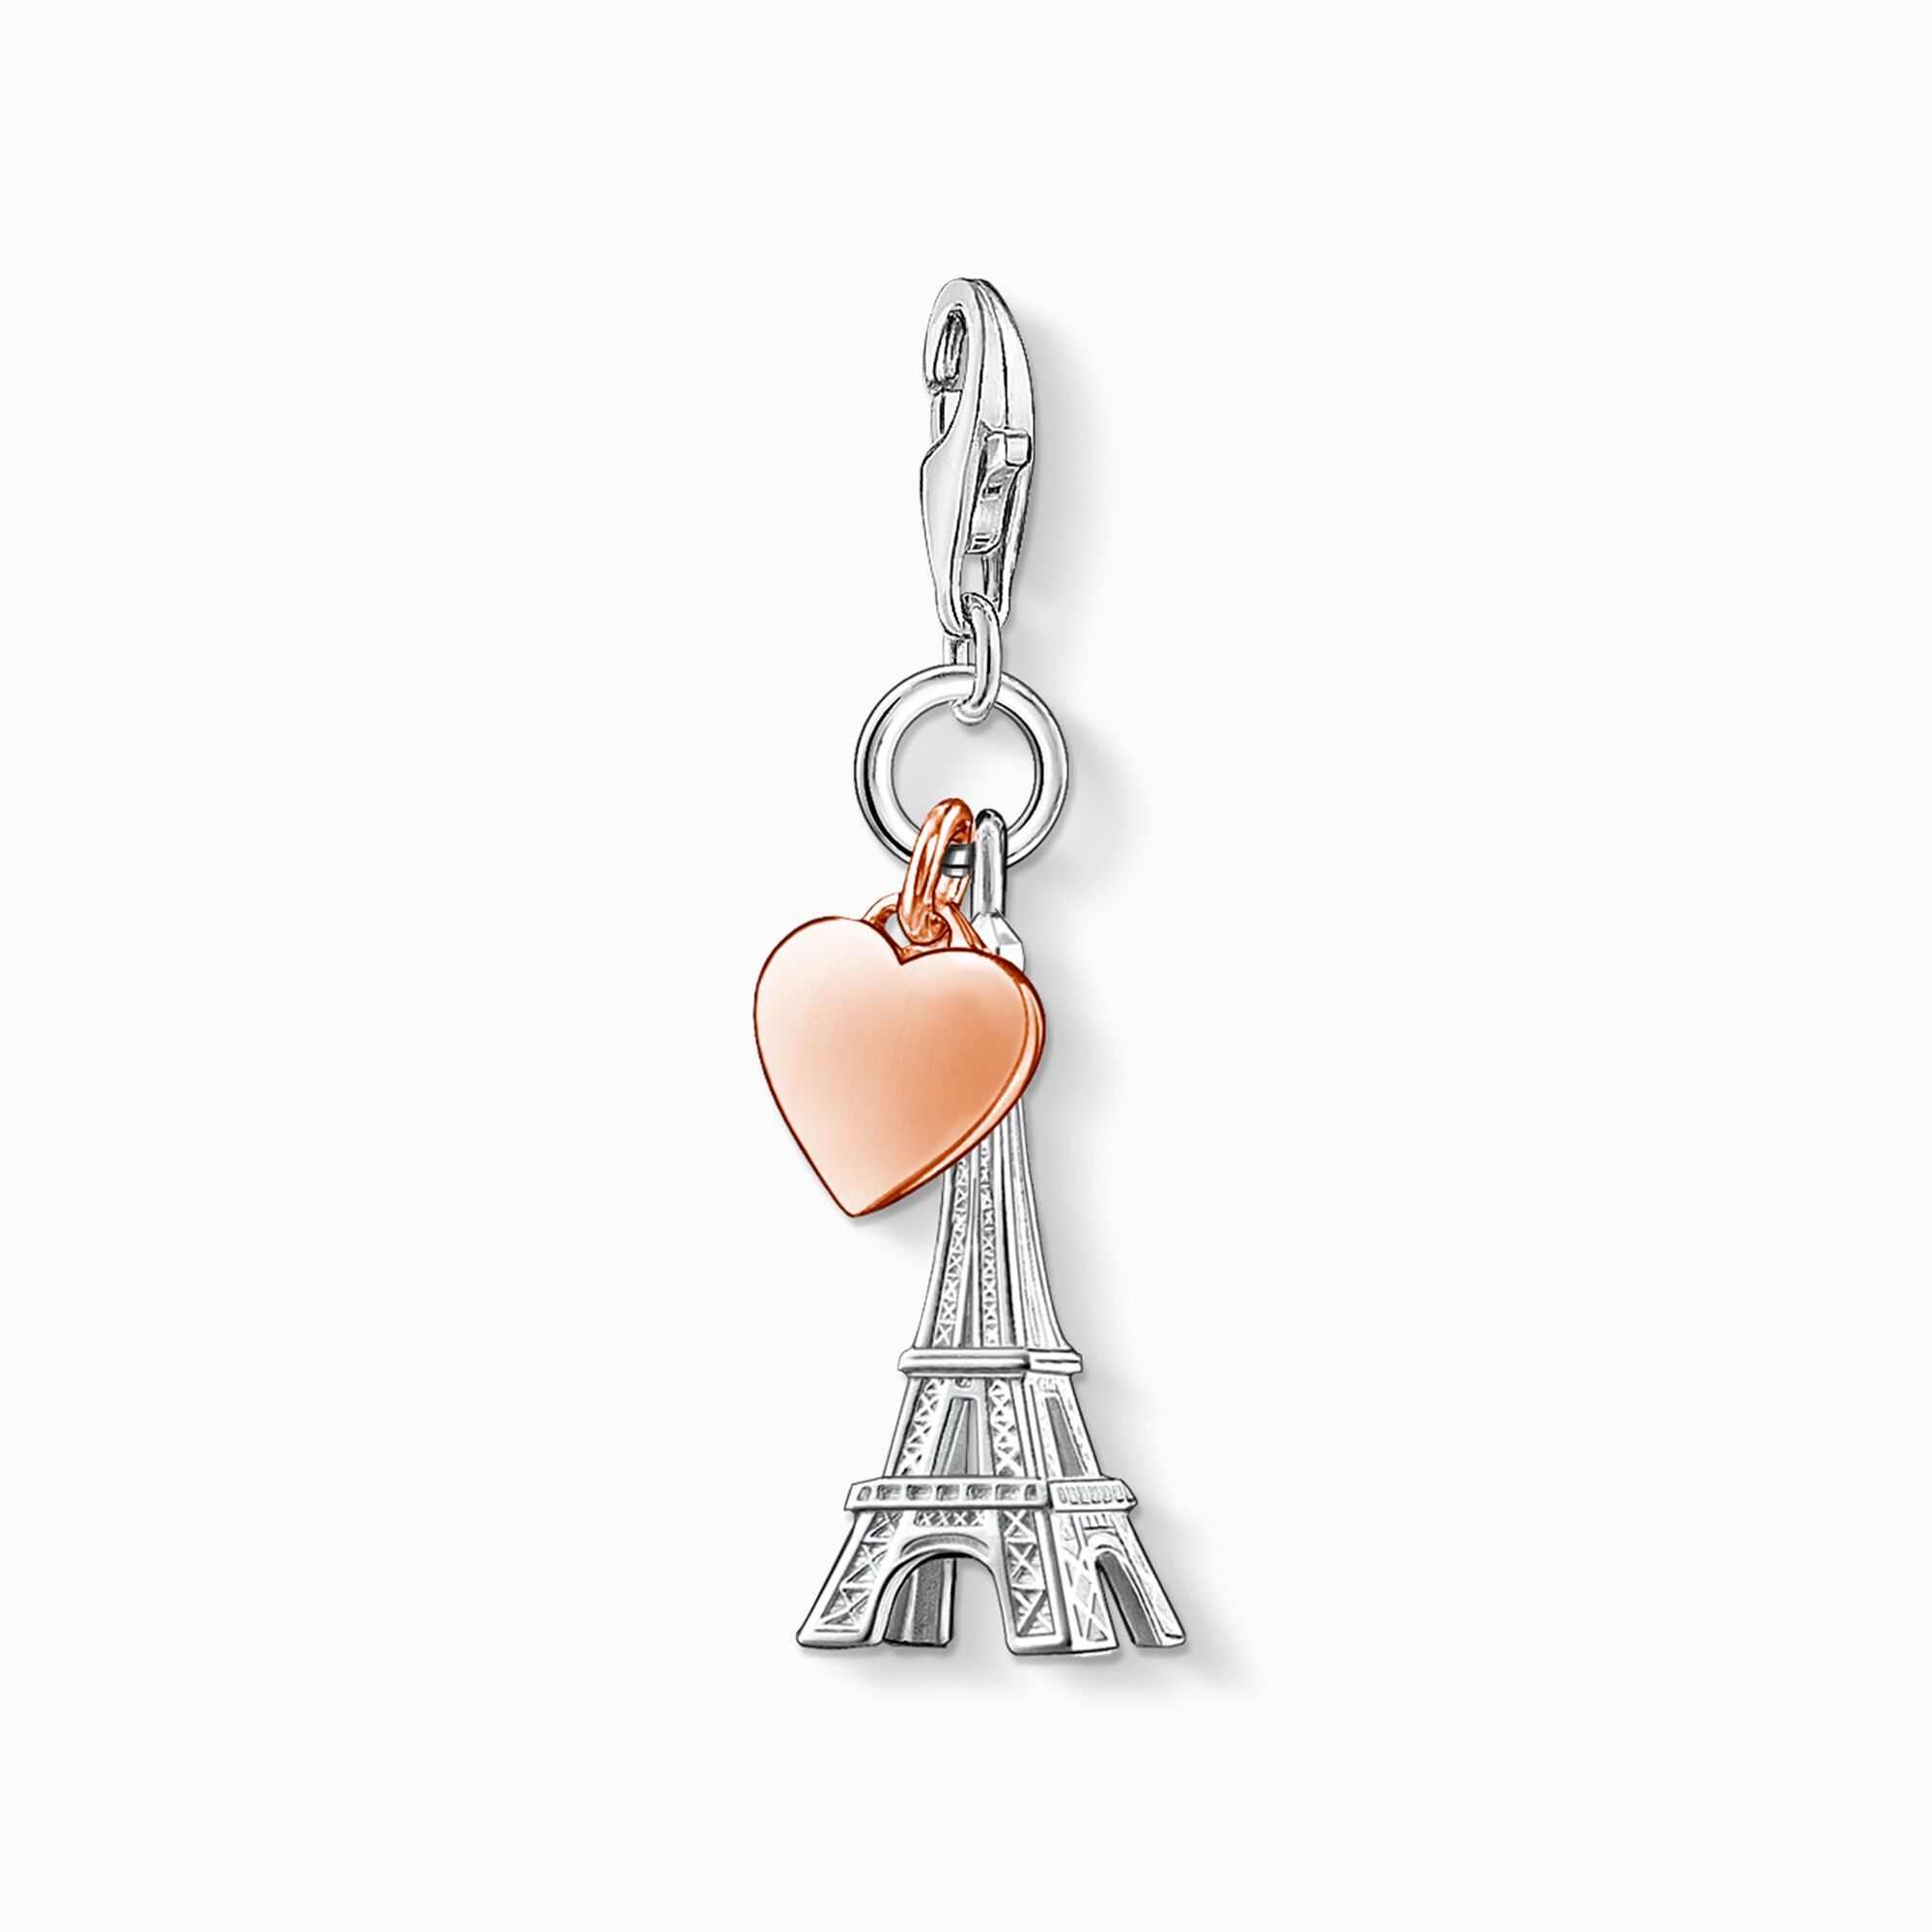 Charm pendant Eiffel Tower with heart from the Charm Club collection in the THOMAS SABO online store